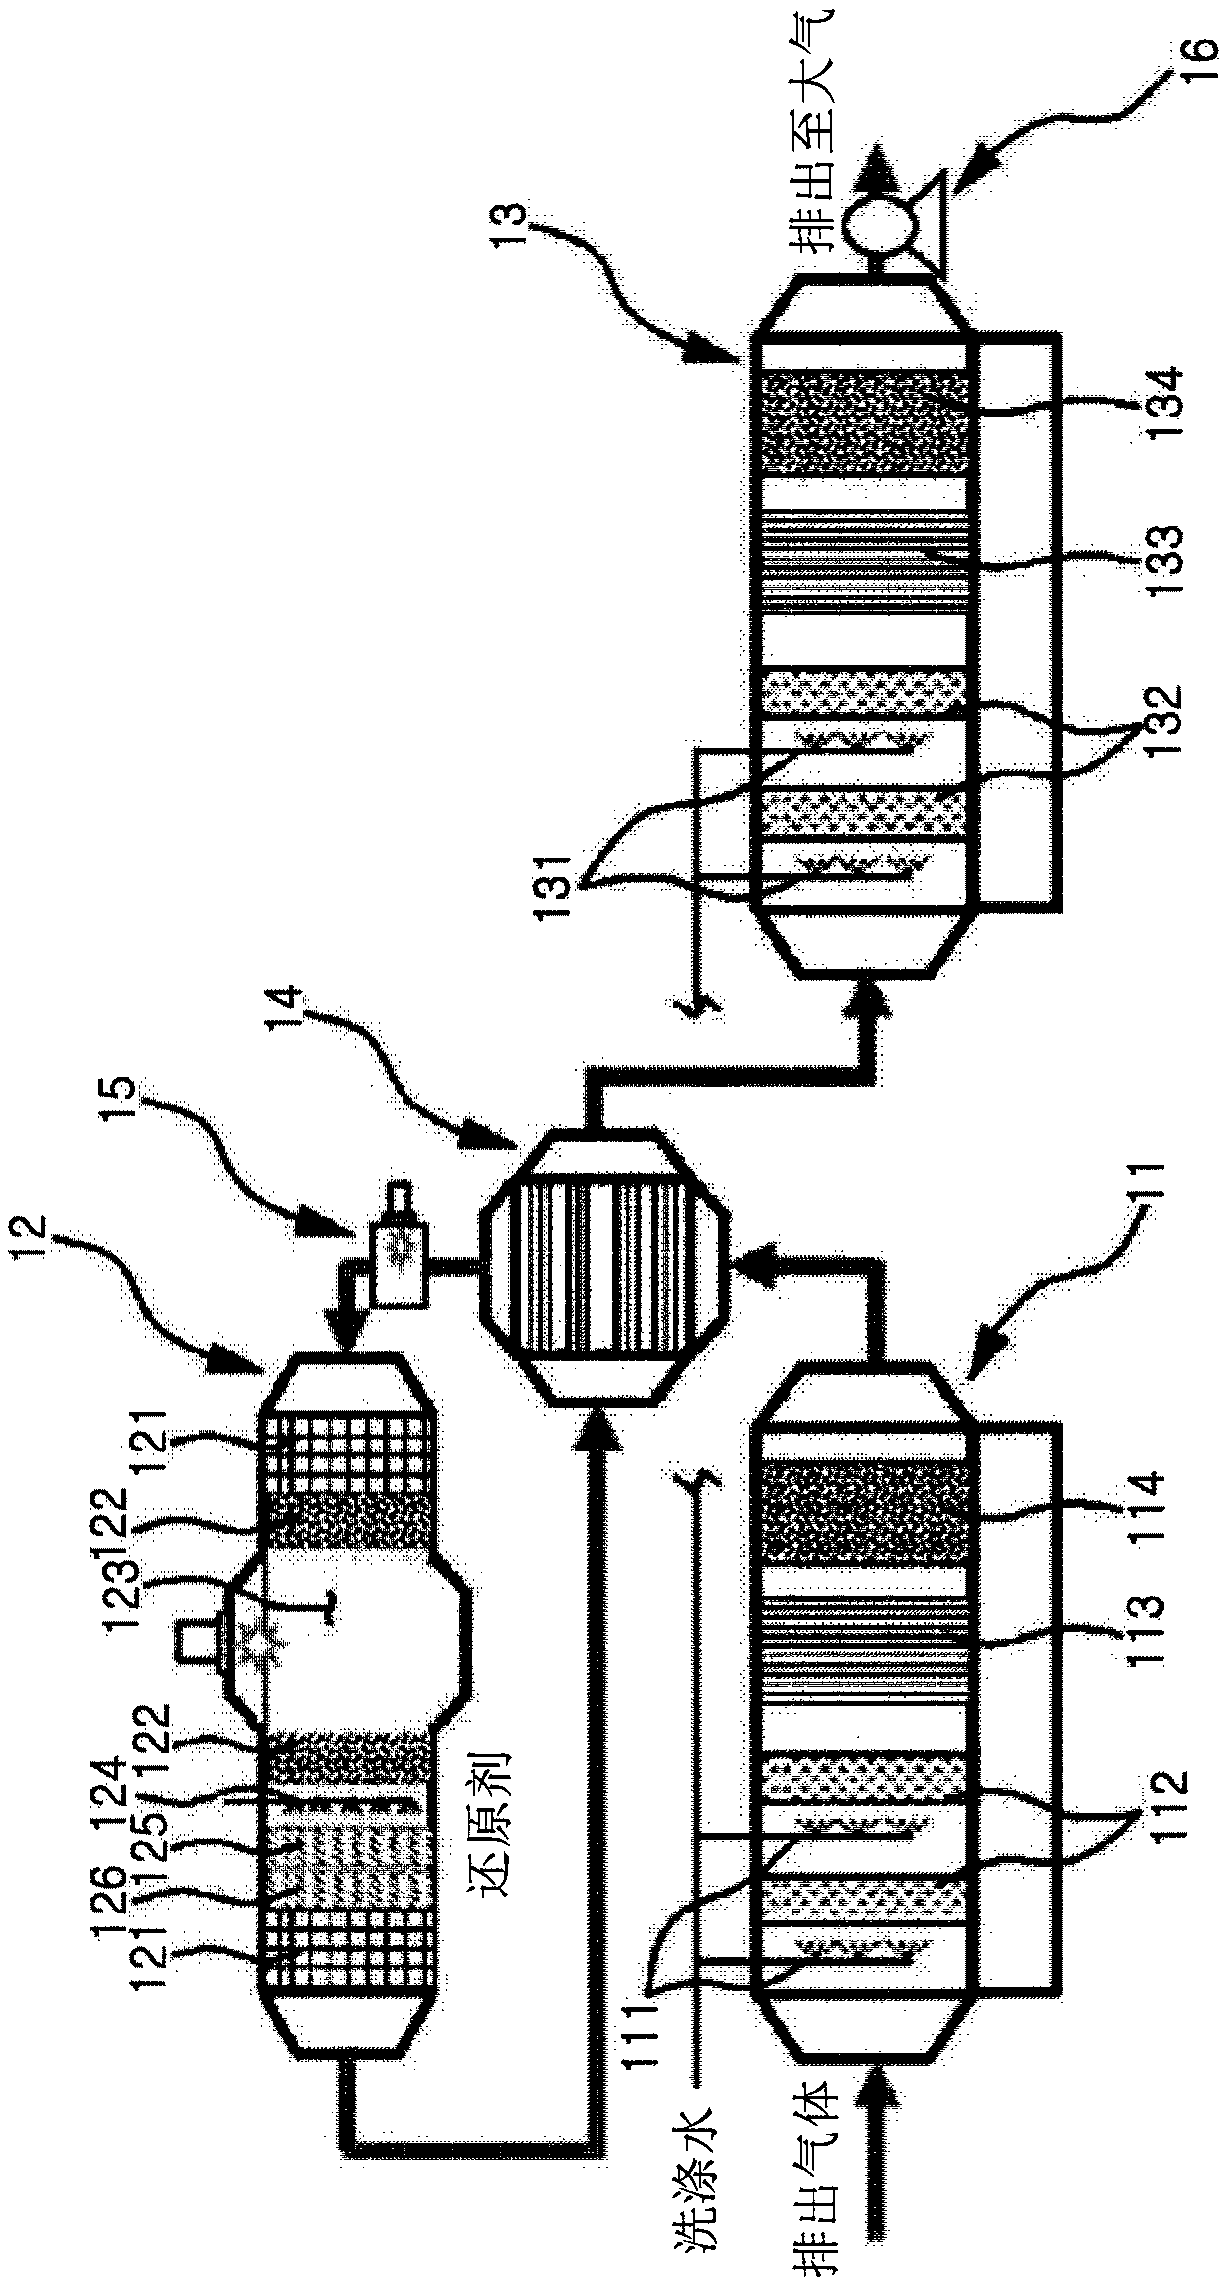 Integrated treatment system for composite waste gas comprising nitrogen oxides, chlorofluorocarbons, hydrochlorofluorocarbons, hydrofluorocarbons, and perfluorinated compounds